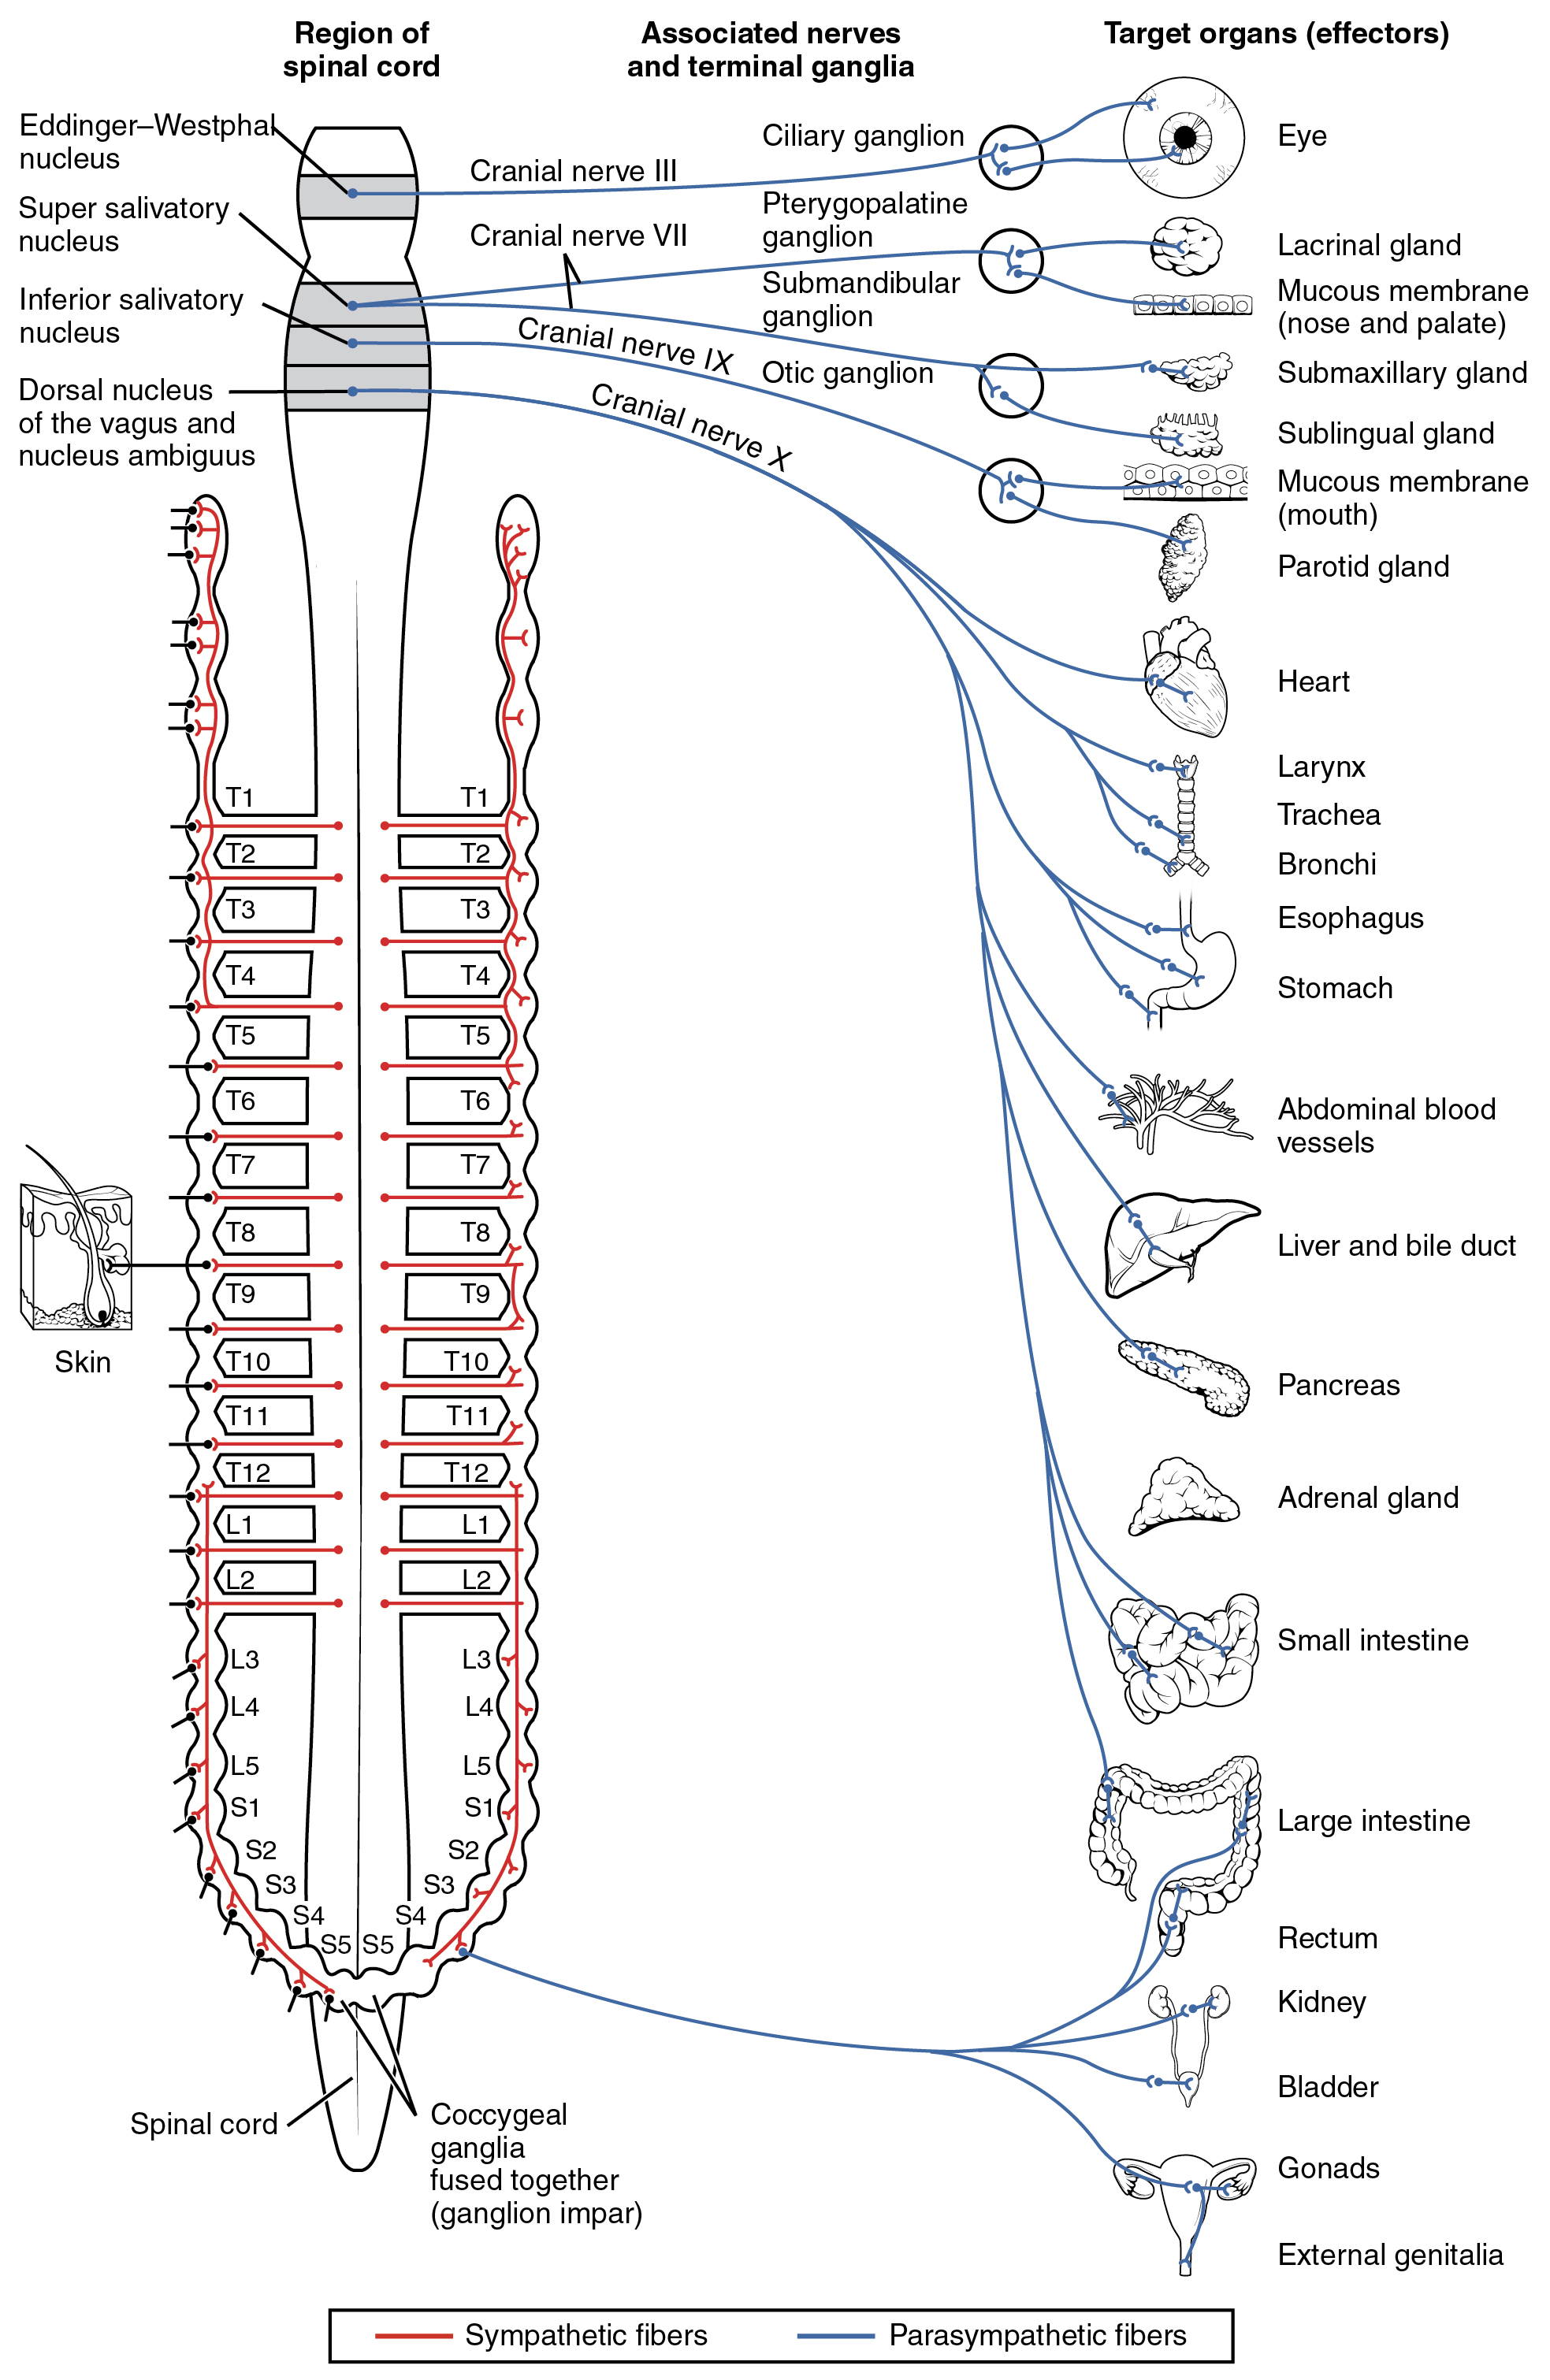 Divisions of the Autonomic Nervous System – Anatomy & Physiology